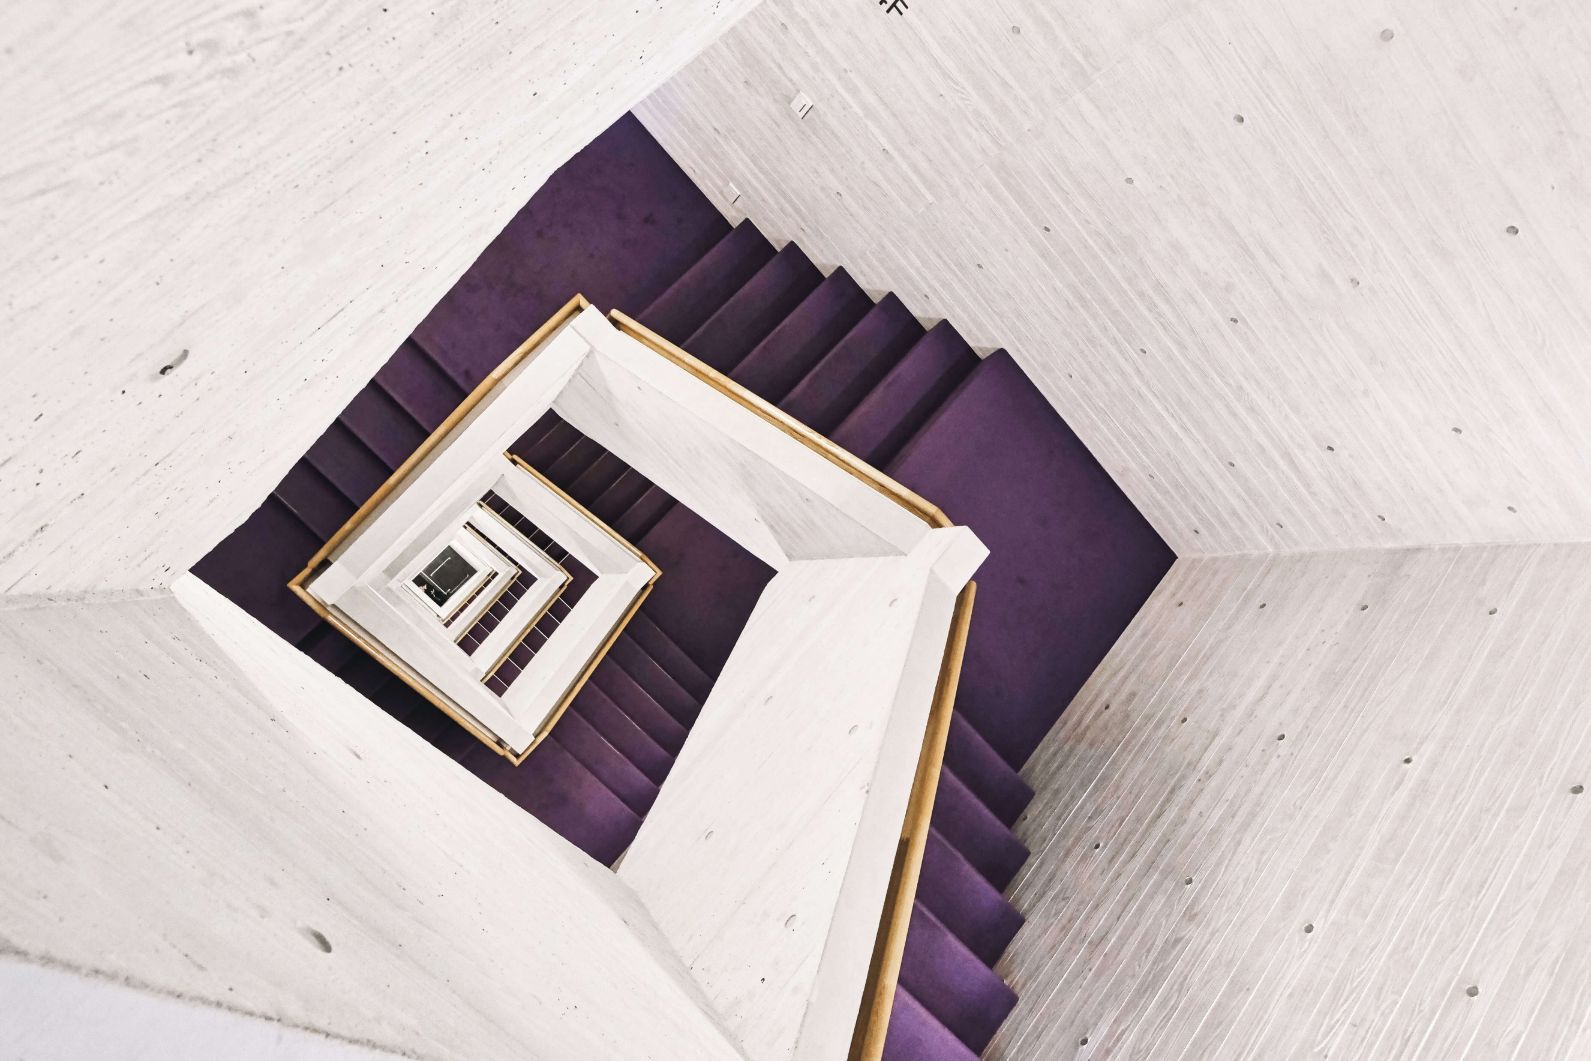 The purple carpet gives this spot a certain luxury vibe. The staircase is located in a religious building but is solemnly used.